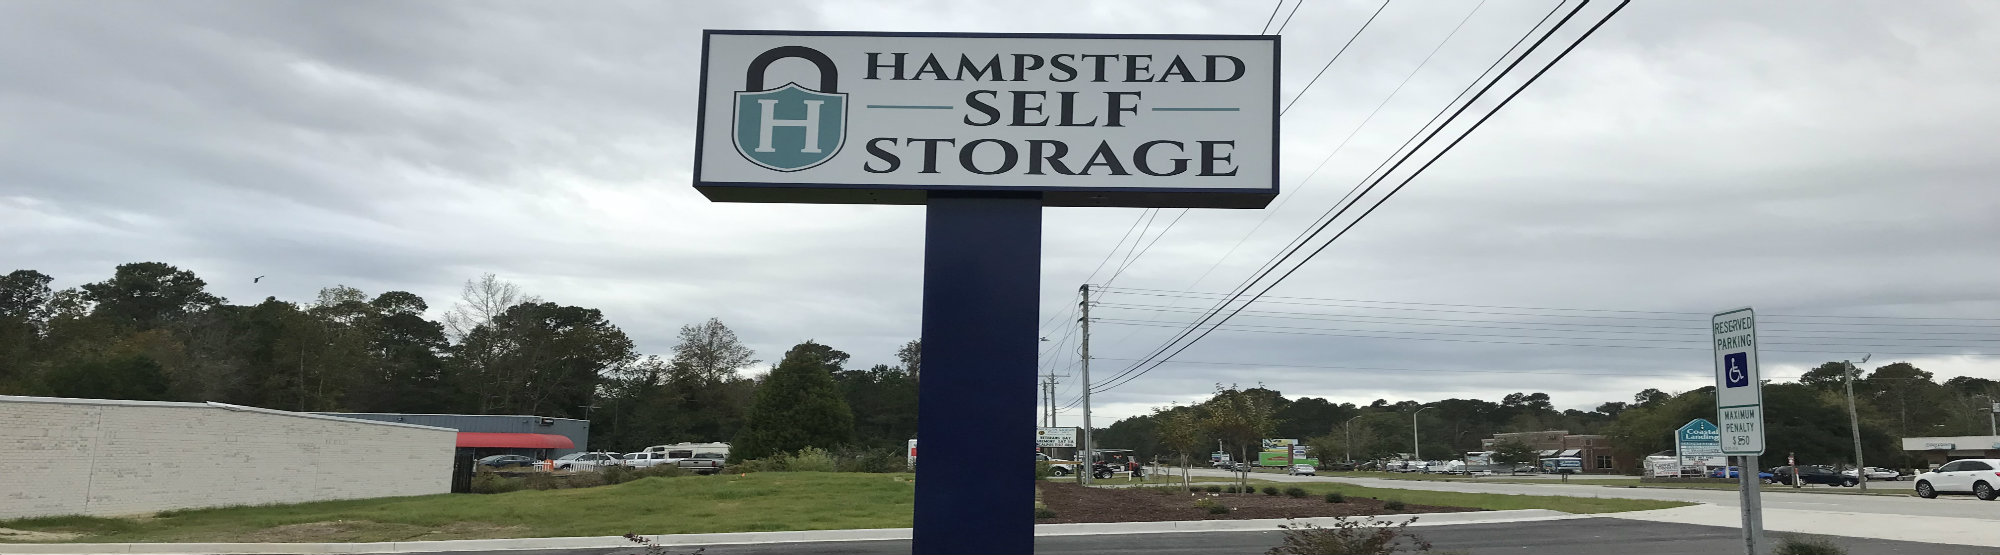 Interior Climate Controlled Storage in Hampstead, NC